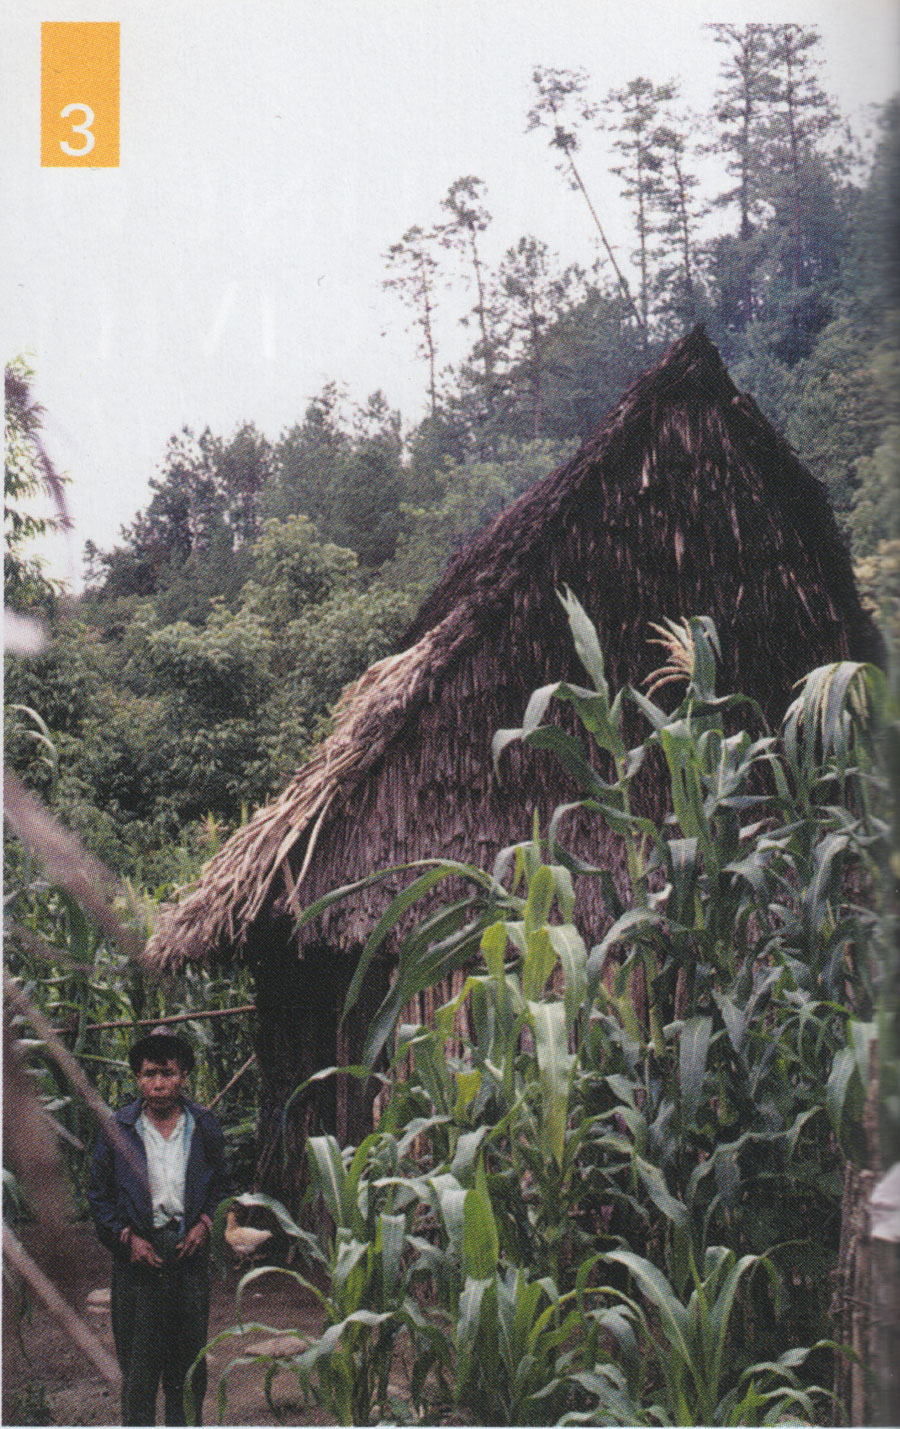 A man standing outside a thatch house, next to maize crops.